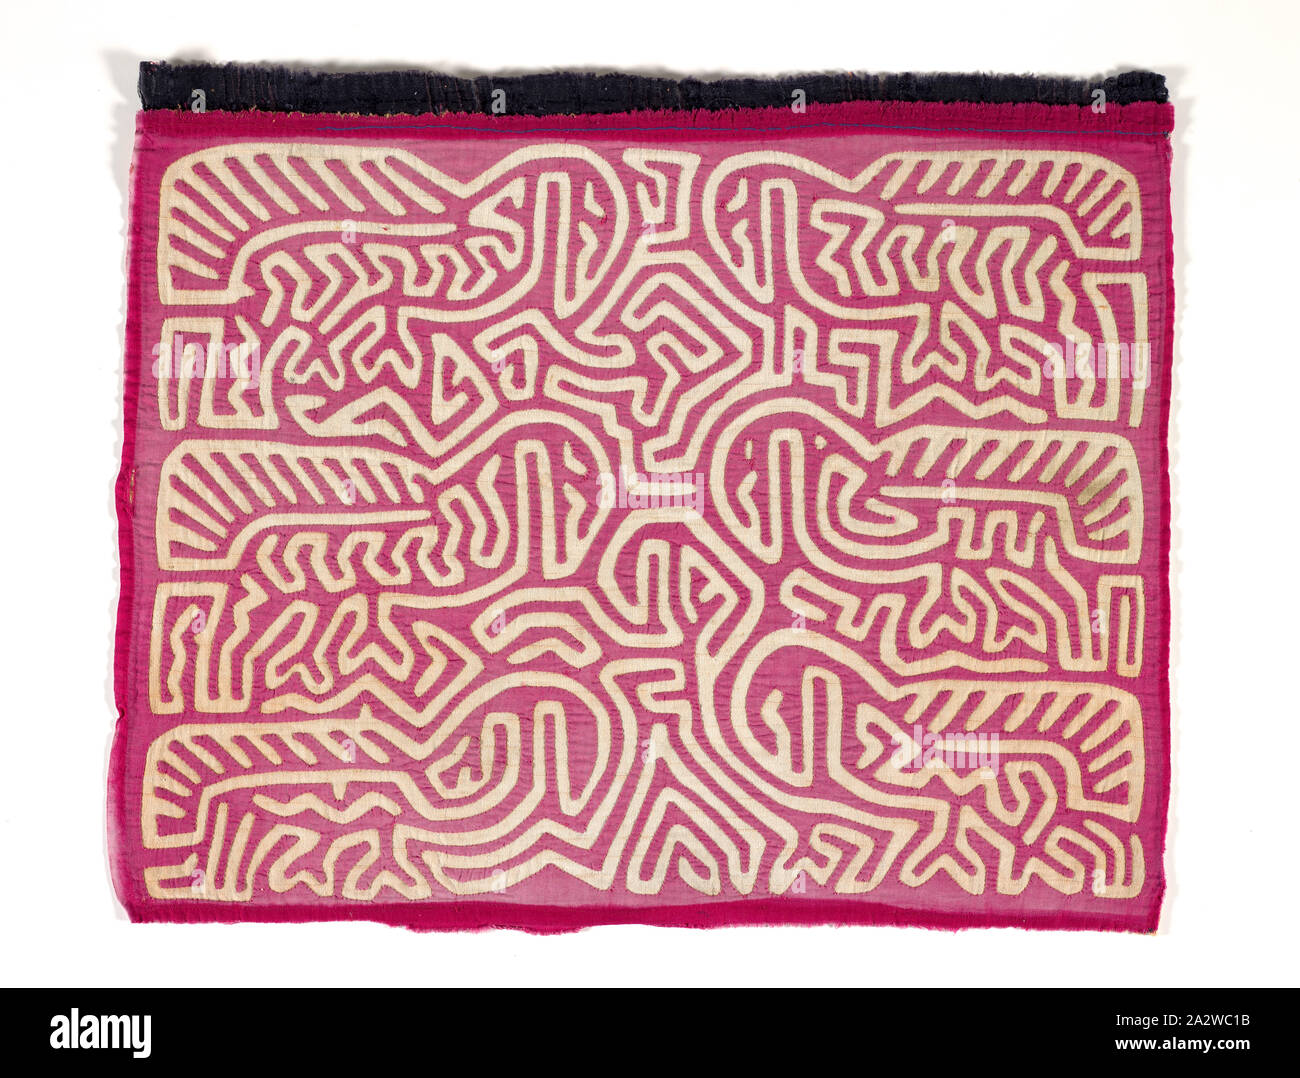 shirt panel (mola), Kuna people, about 1950s, appliqued cotton, 16-7/8 x 20-3/4 in., Textile and Fashion Arts Stock Photo